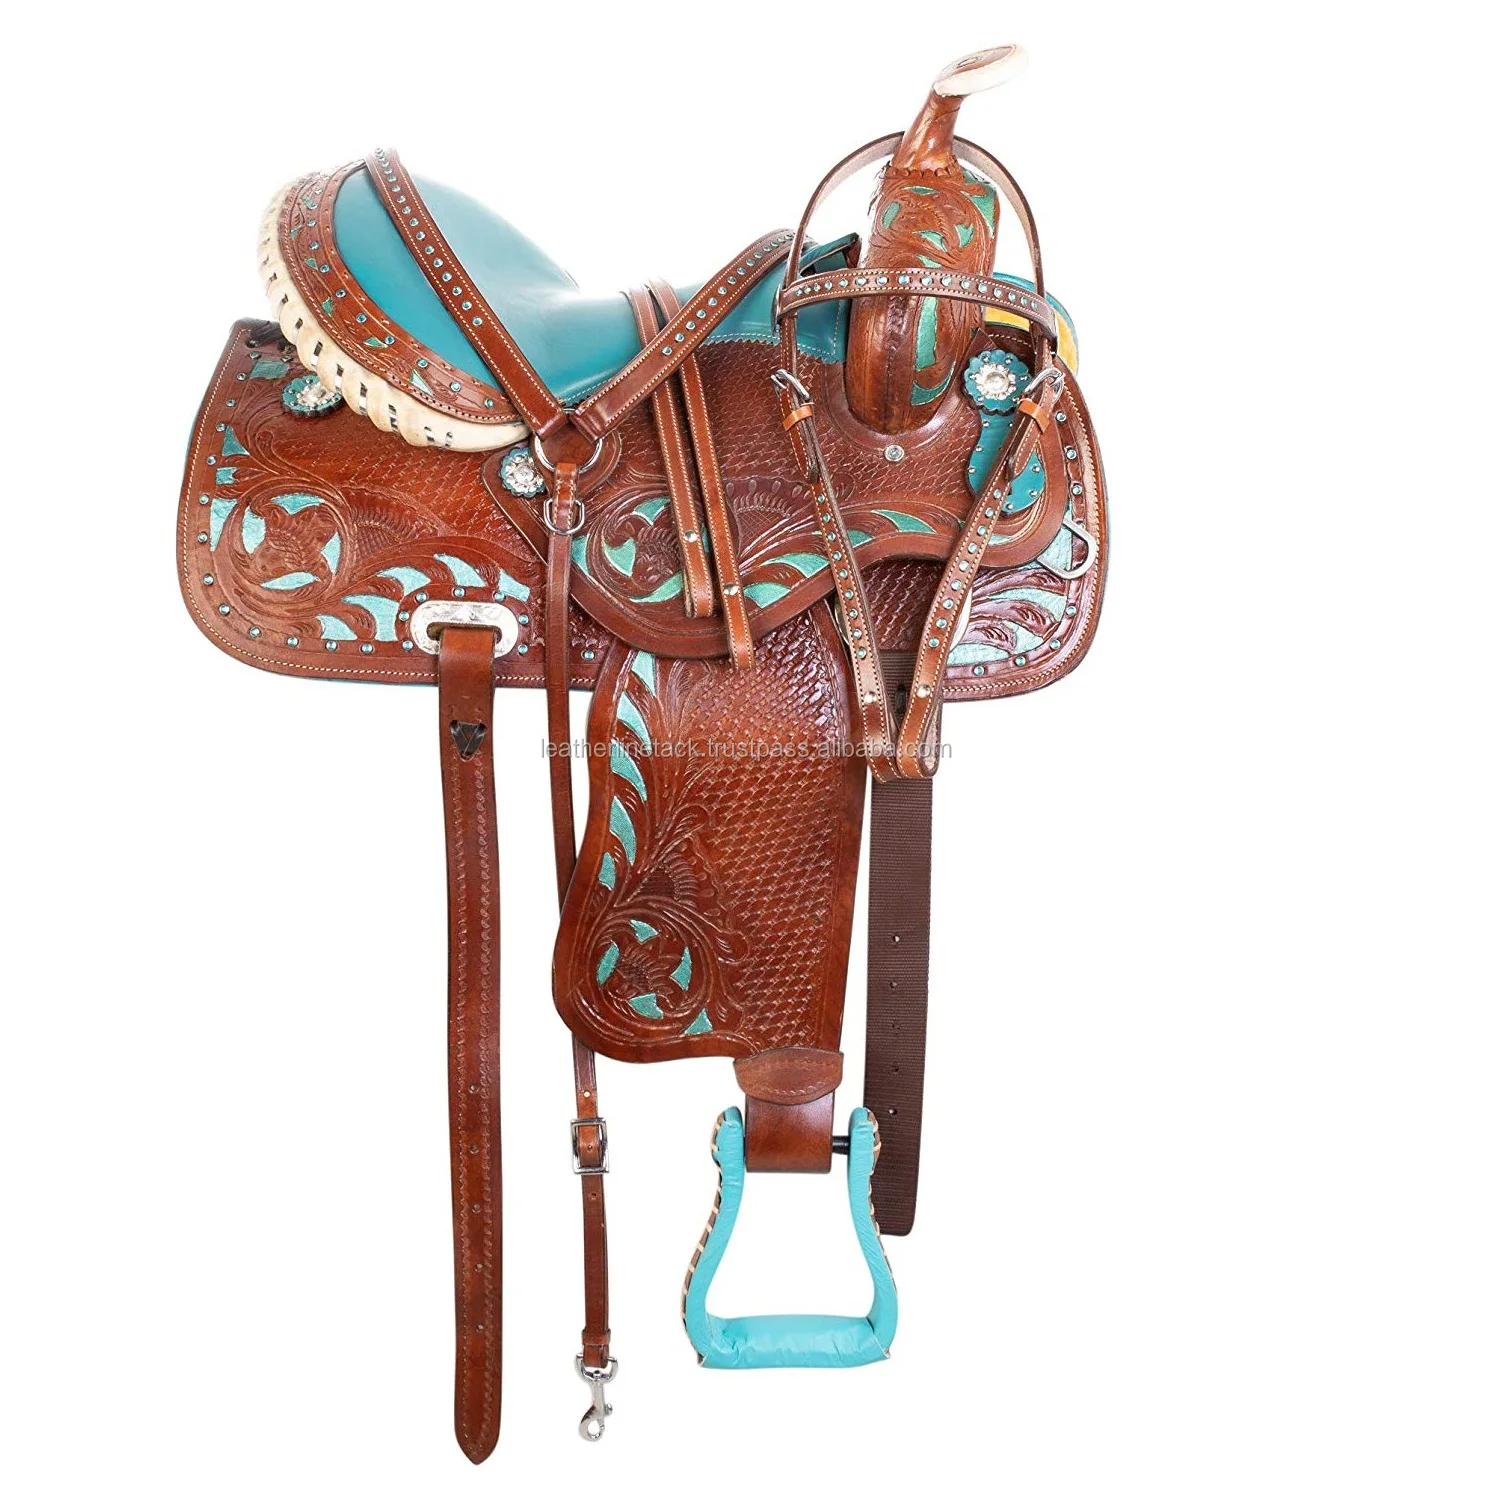 Western Premium Leather Barrel Racing Trail Horse Saddle Tack Size 14 to 18 Inch 